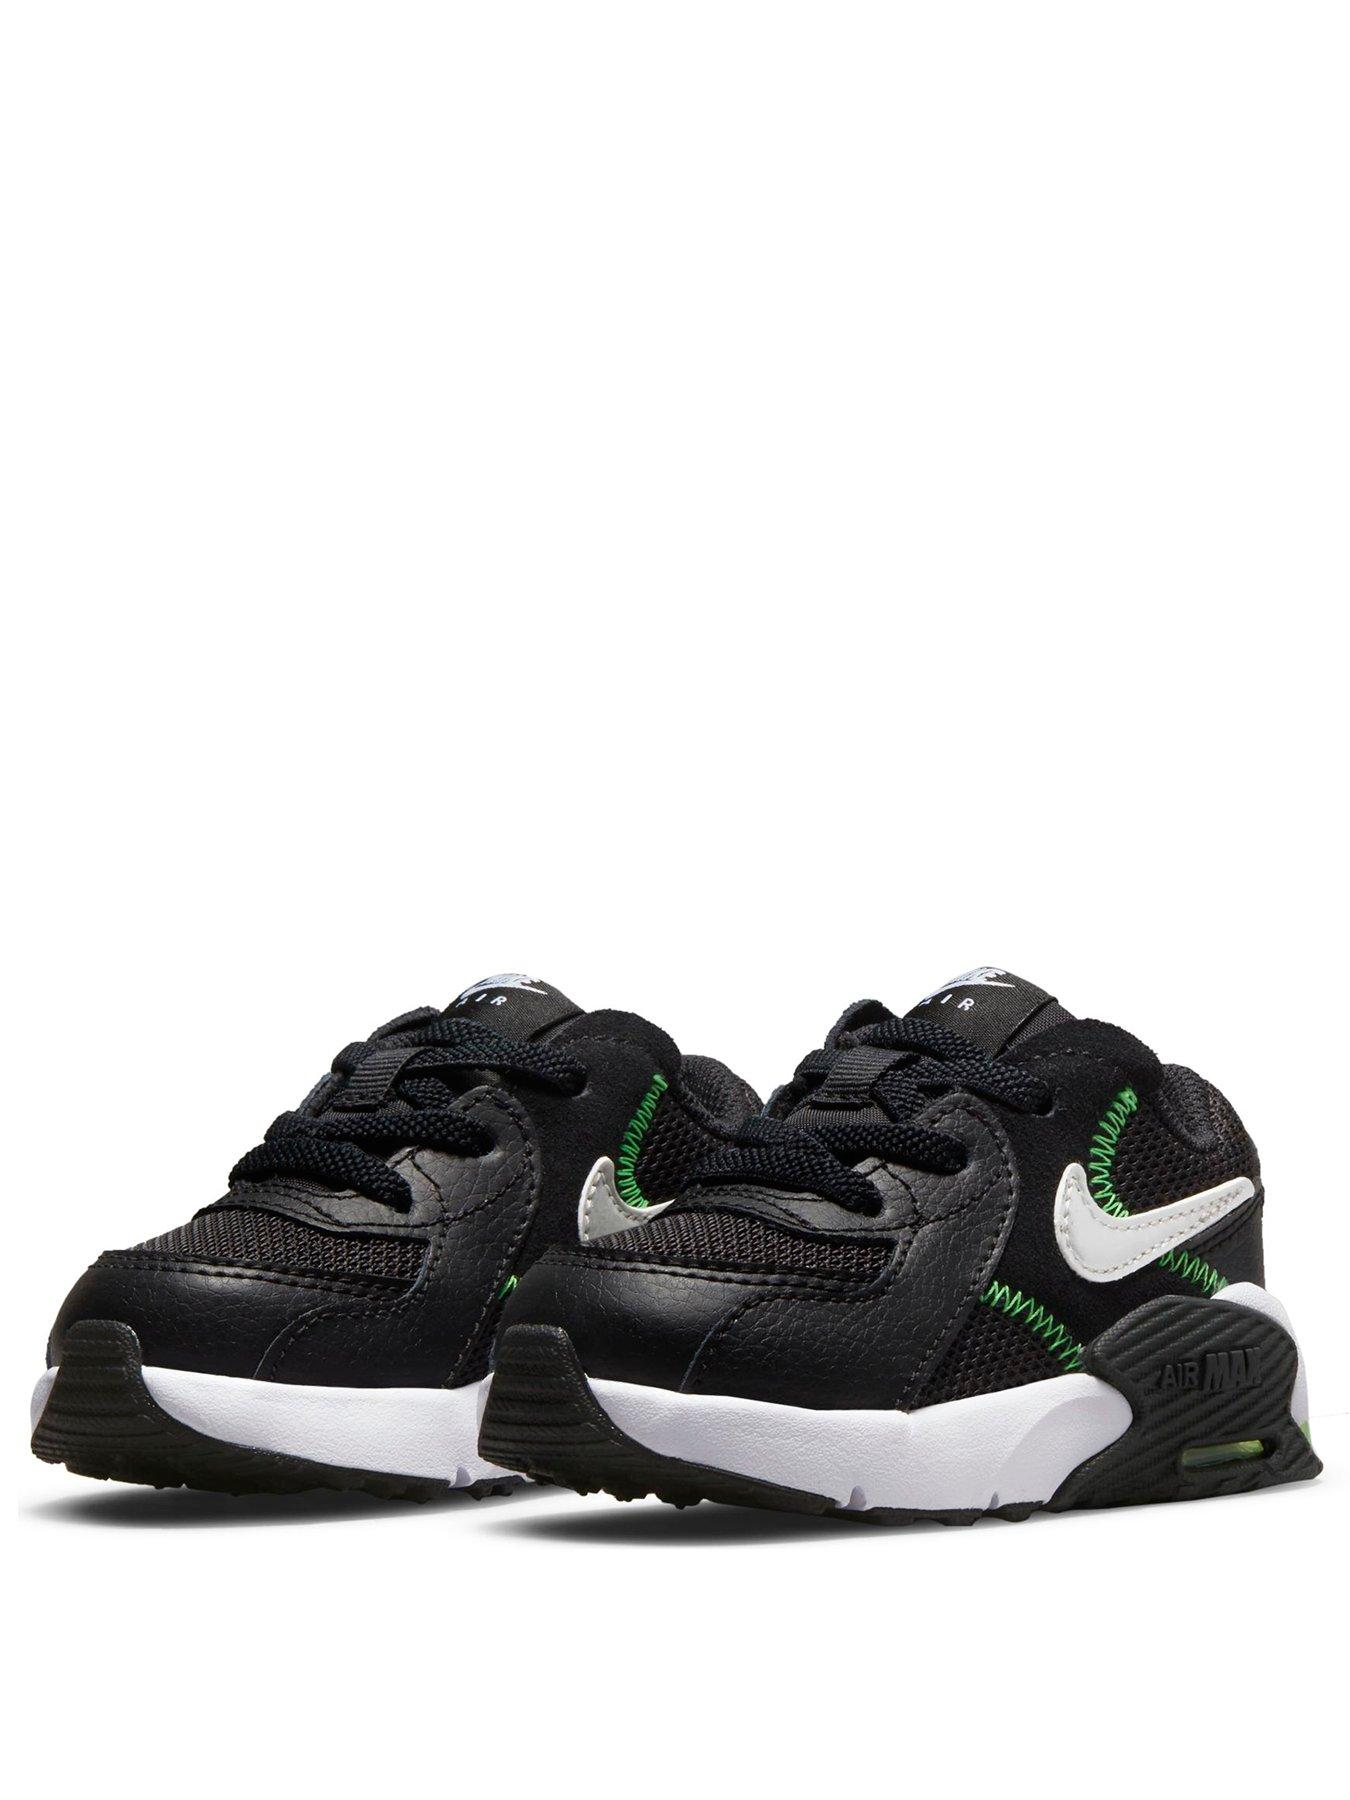 Trainers Air Max Excee Infant Trainer - Black/Multi